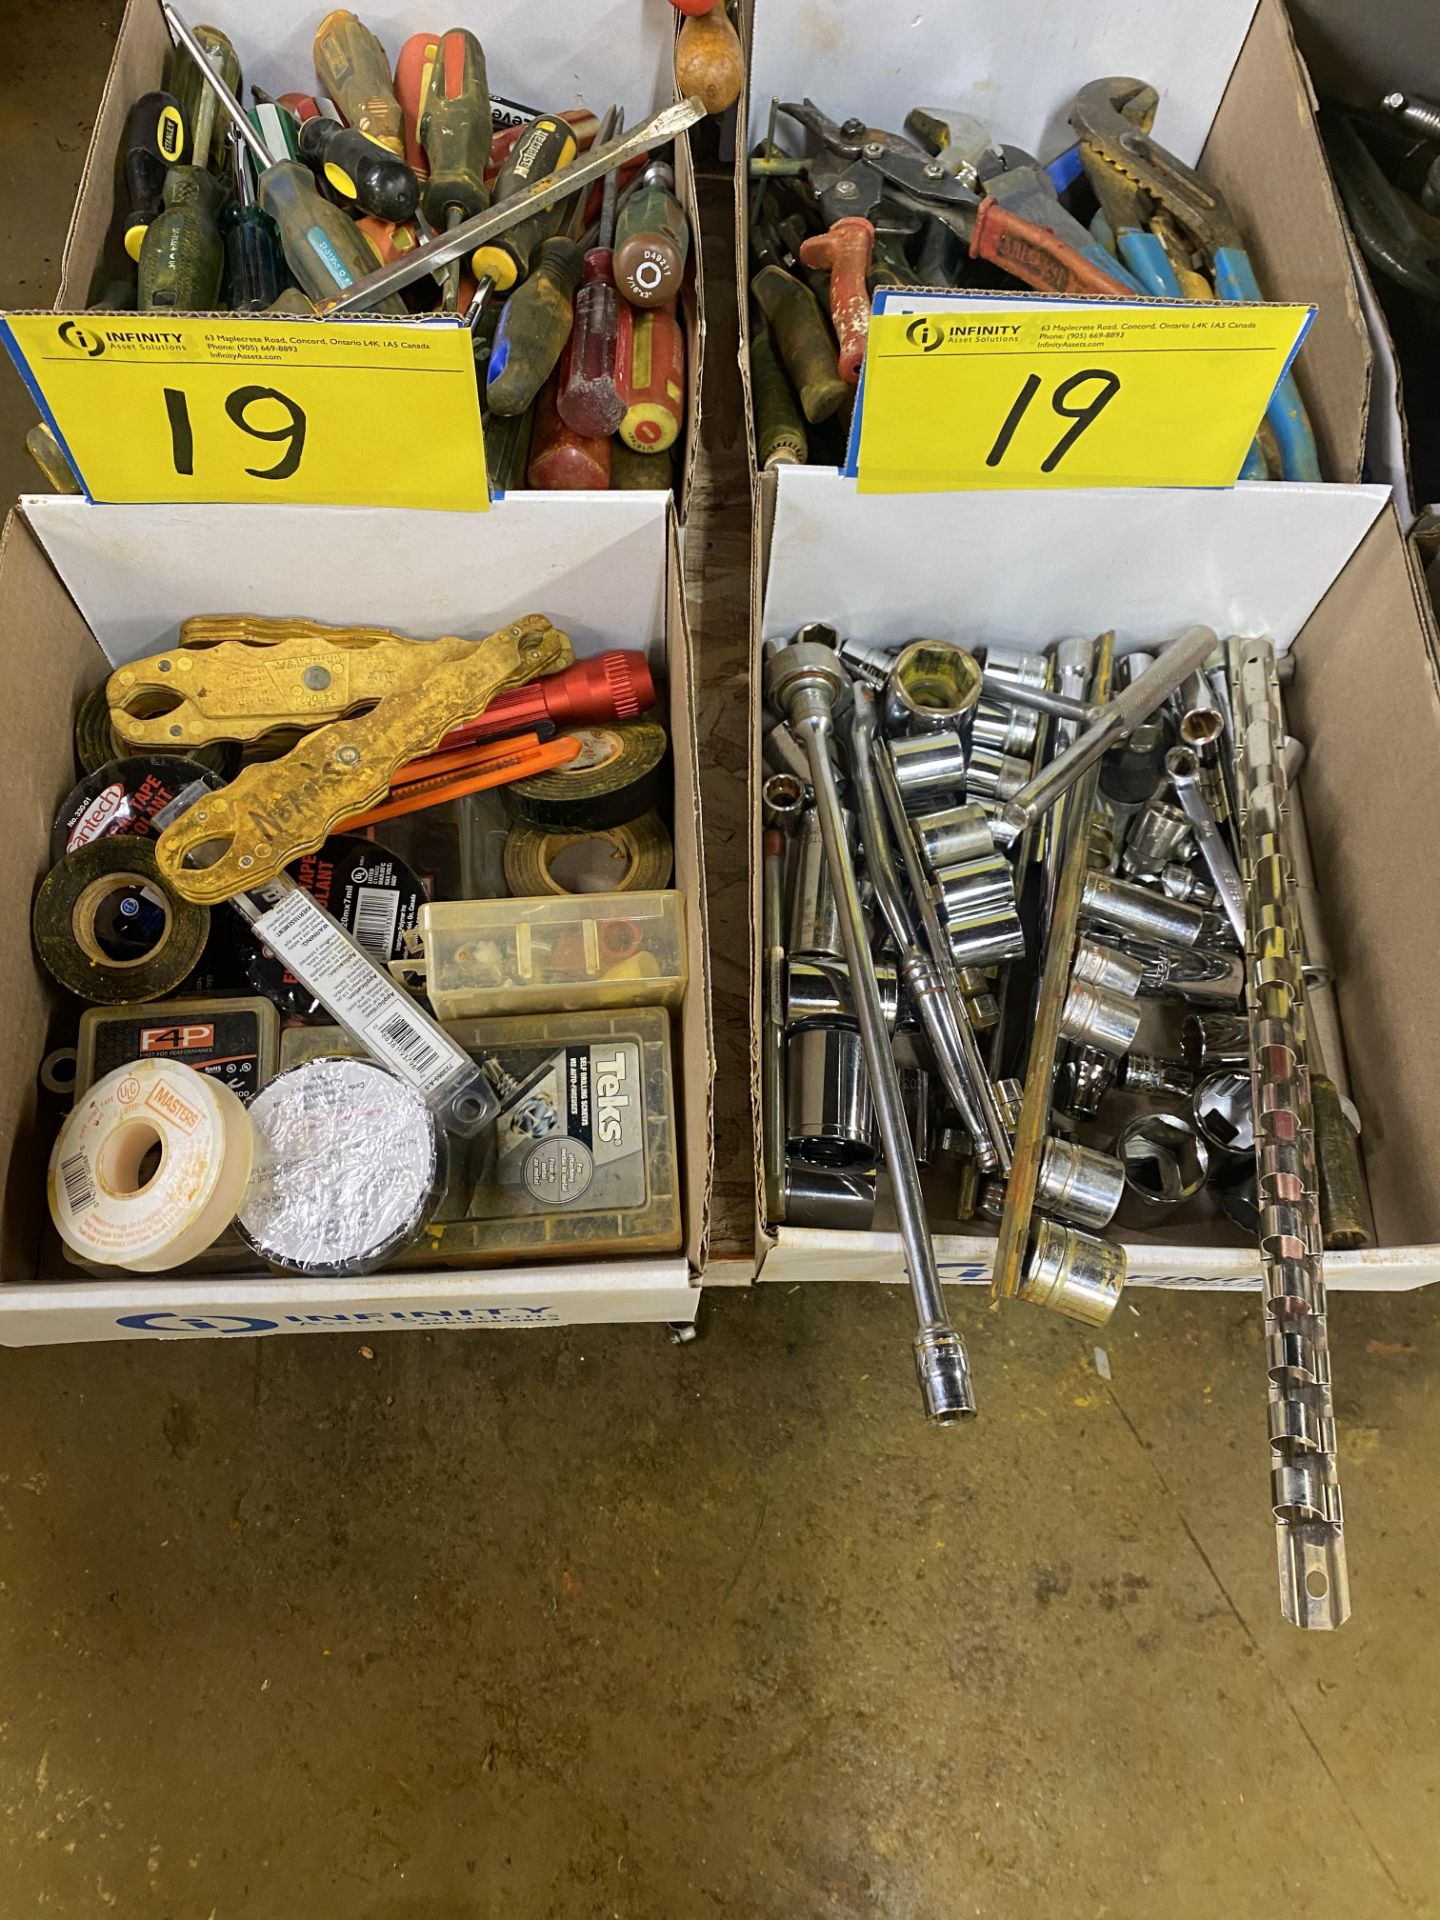 LOT OF (8) BOXES OF TOOLS, CHANNEL LOCKS, DRIVERS, VISE GRIPS, MALLOTS, ALLEN KEYS, MIXED TOOLS, - Image 2 of 3